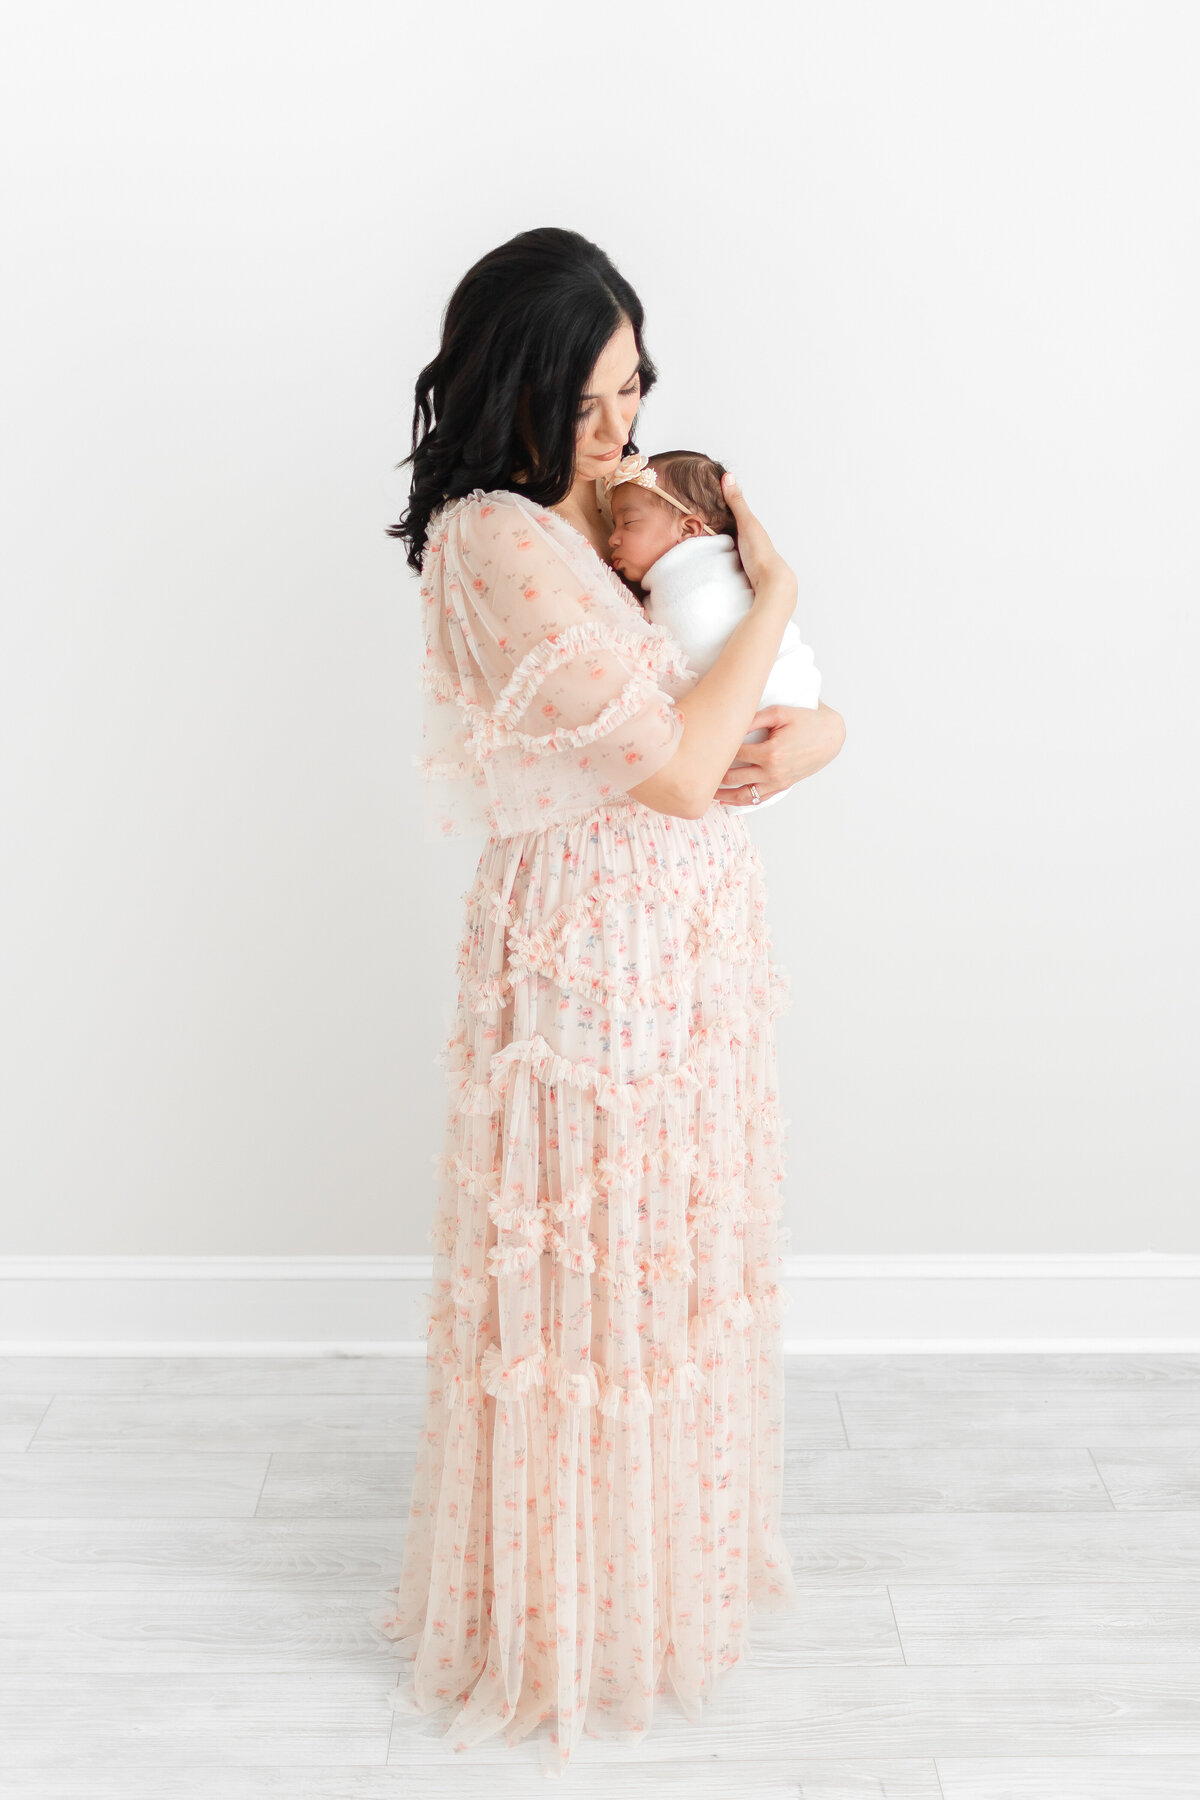 A photo of a mother snuggling her baby girl at her DC Newborn Photography photo session